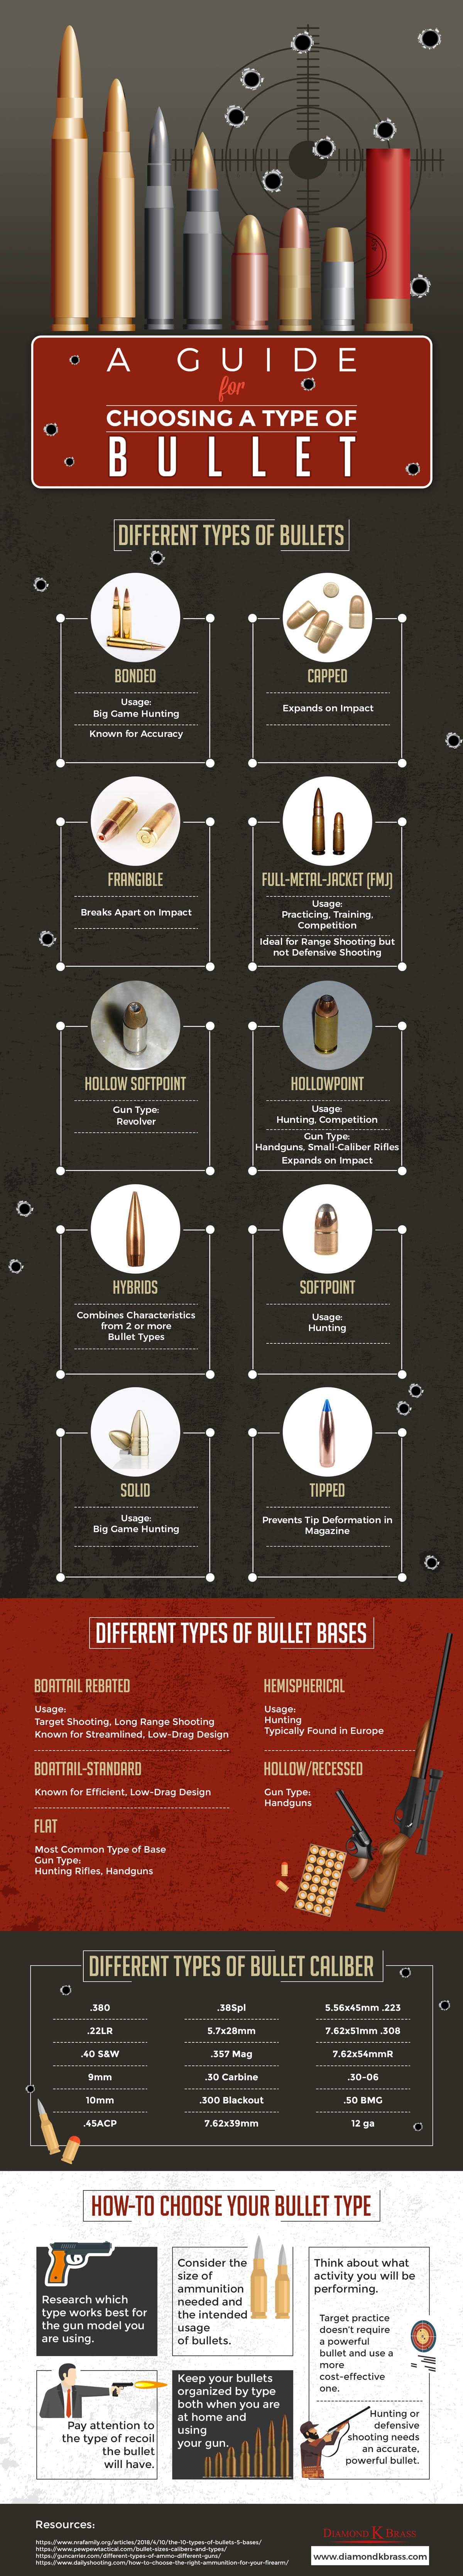 A Guide for Choosing a Type of Bullet #infographic